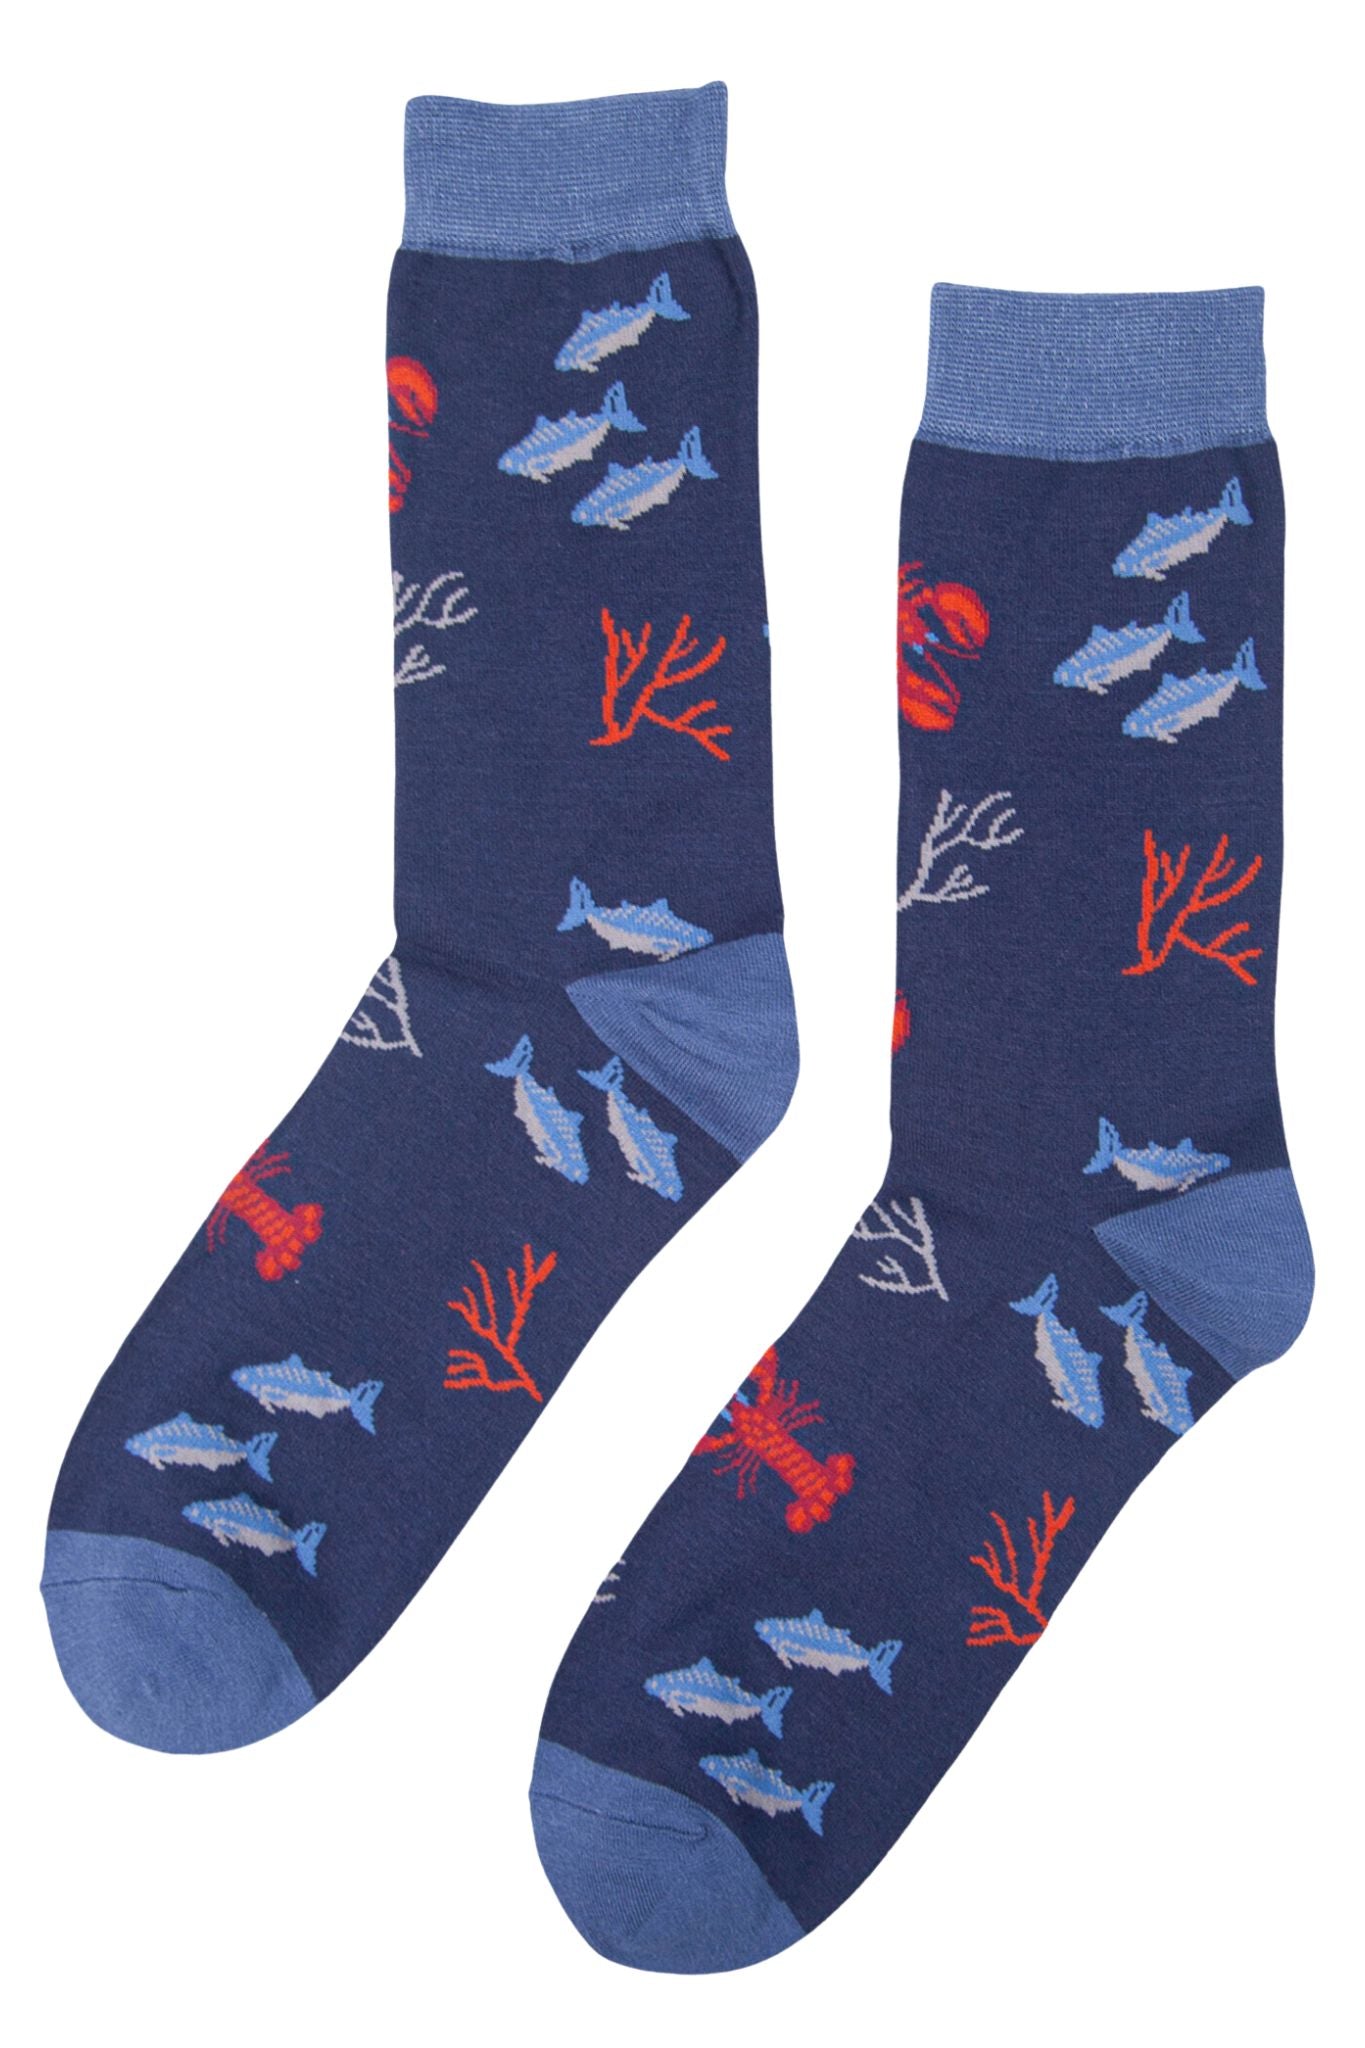 blue bamboo socks wiith fish and lobsters all over